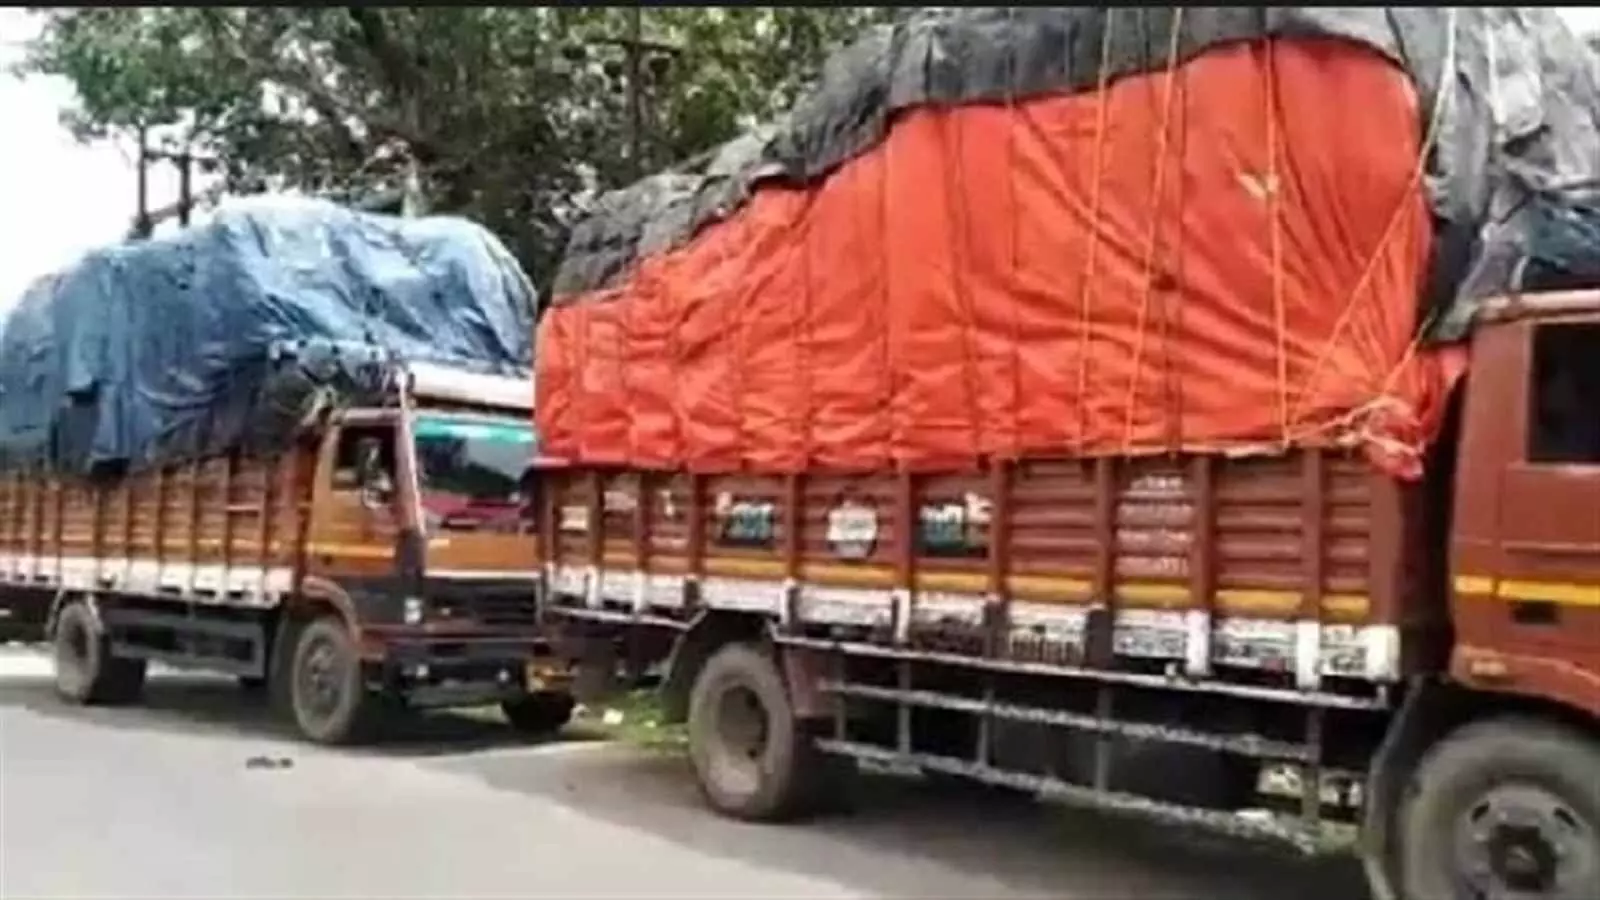 big scandal in the truck release in sonbhadra many trucks were released on fake release order